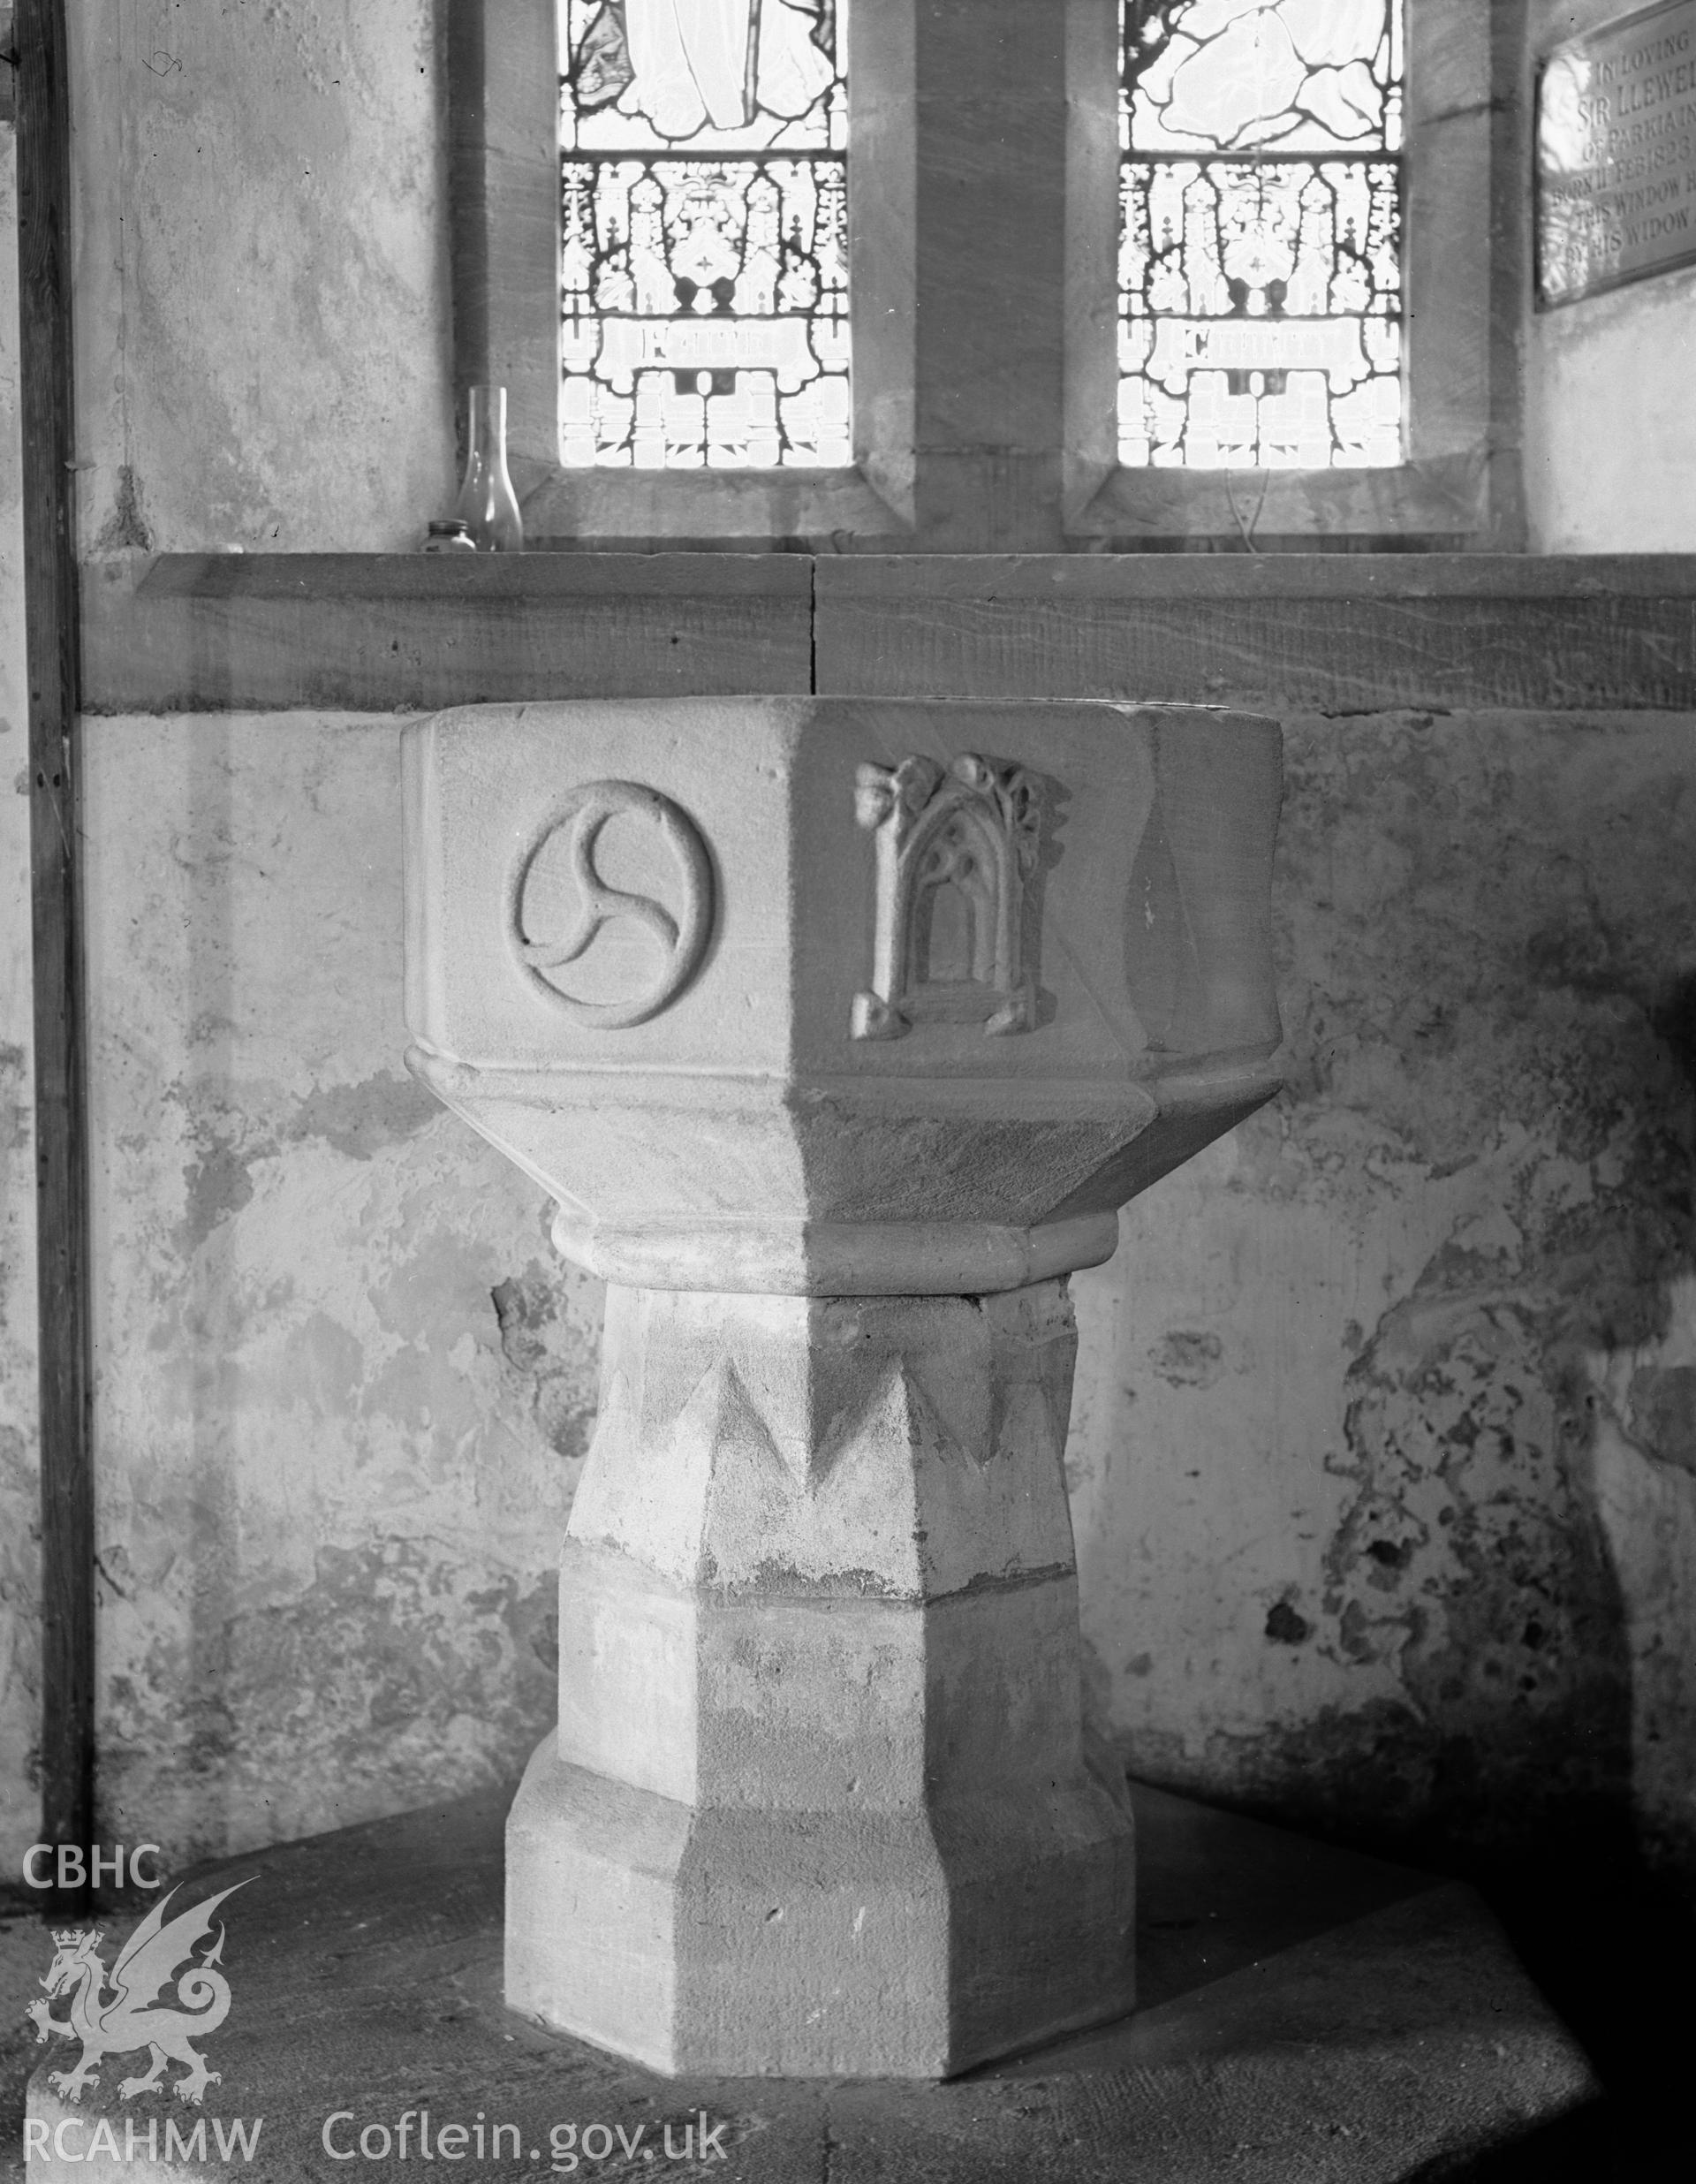 Interior view of St Mary's Church showing font, taken 10.05.1956.